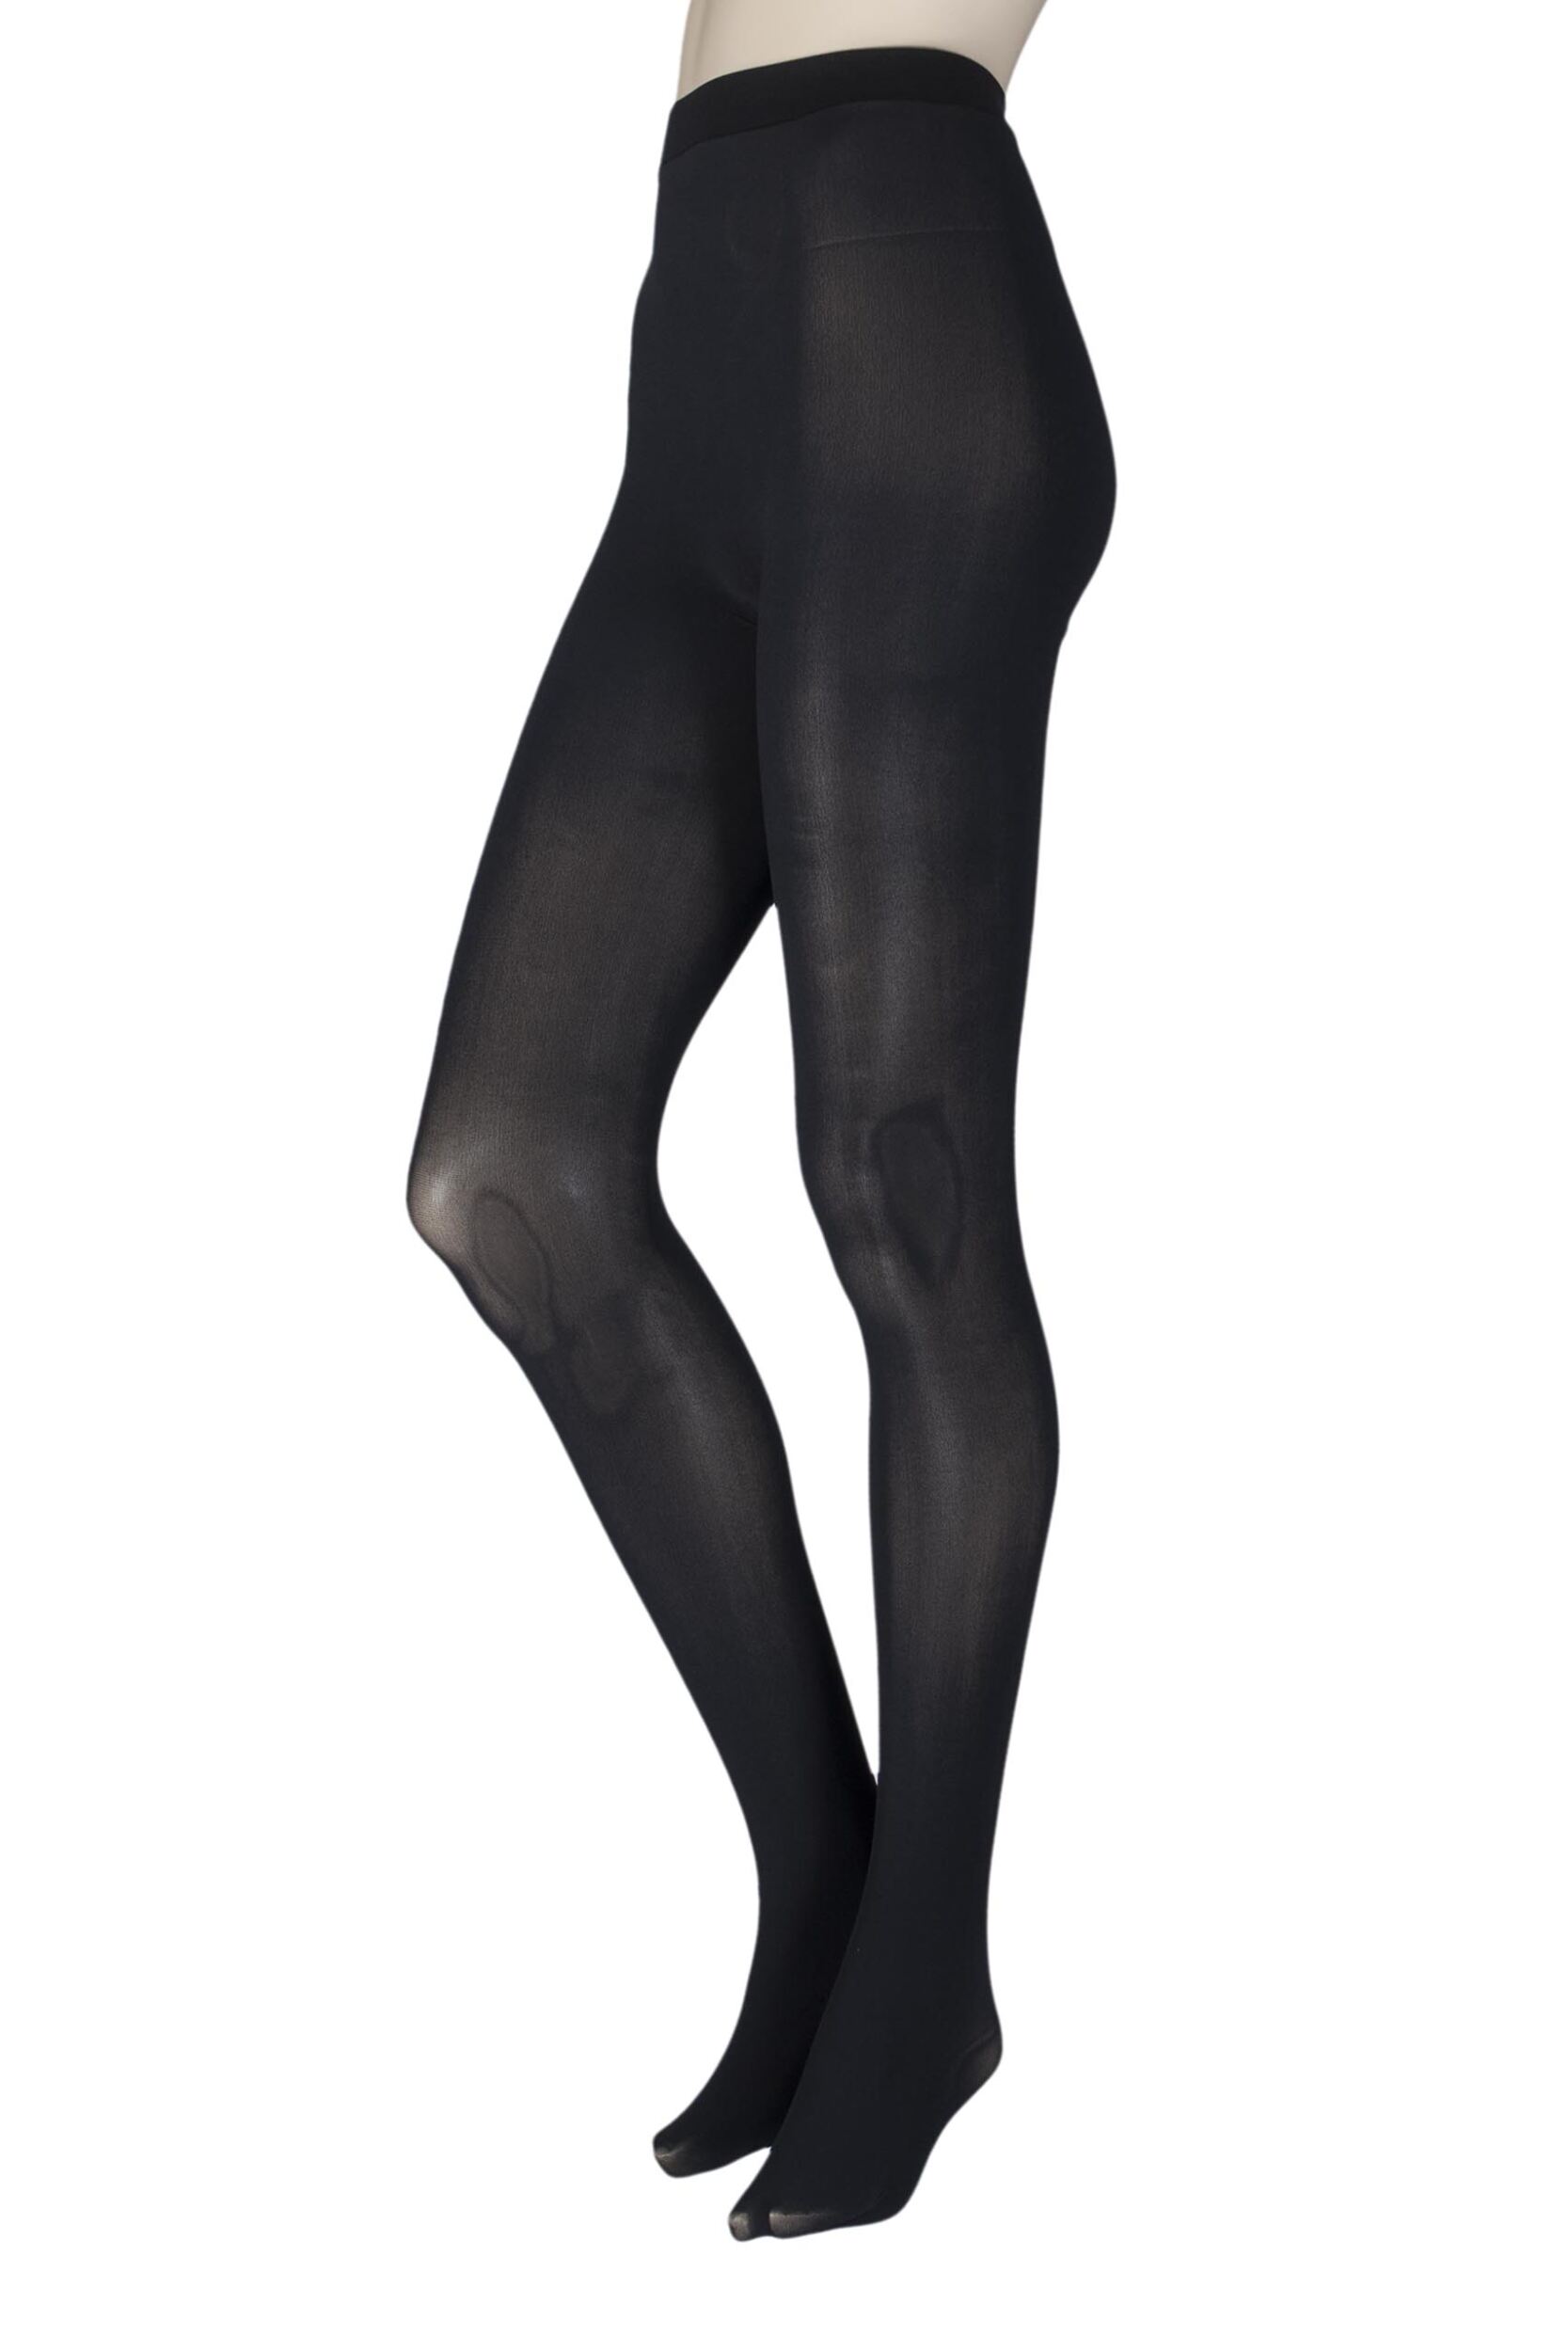 Image of Ladies 1 Pair Couture by Silky Ultimates Seamless and Ladder Proof 60 Denier Opaque Tights